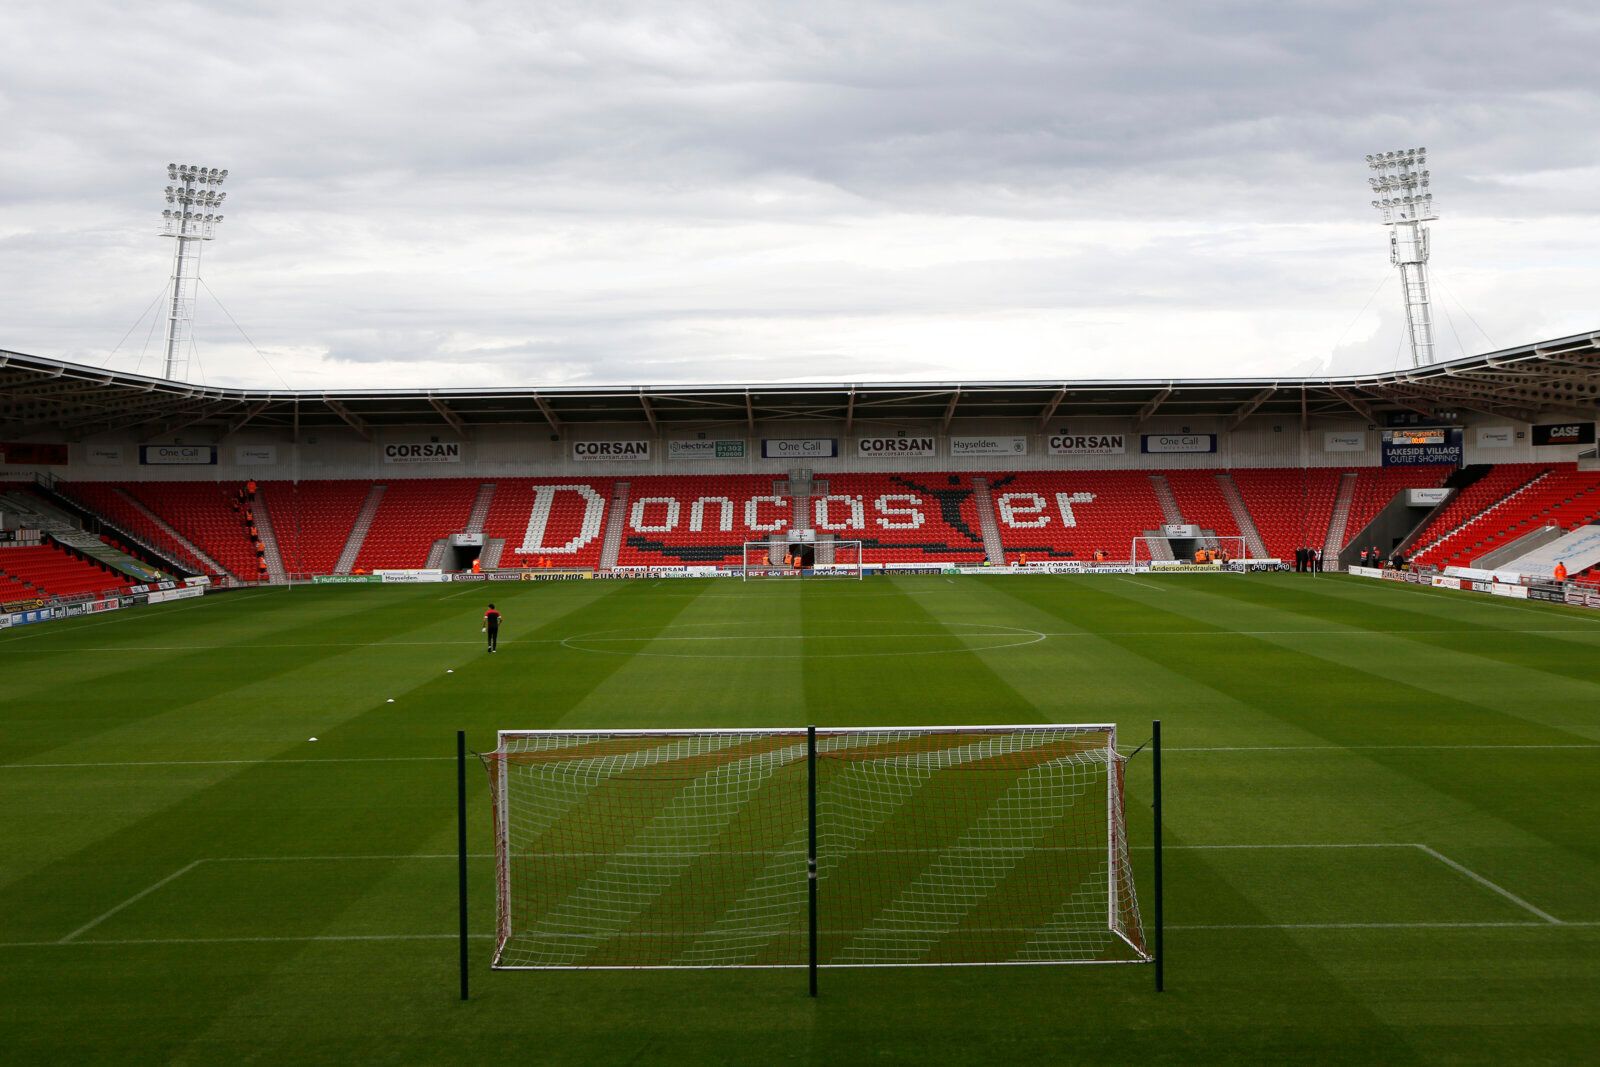 Football - Doncaster Rovers v Sunderland - Pre Season Friendly - Keepmoat Stadium - 15/16 , 29/7/15 
General View of the Keepmoat Stadium 
Mandatory Credit: Action Images / Craig Brough 
EDITORIAL USE ONLY.